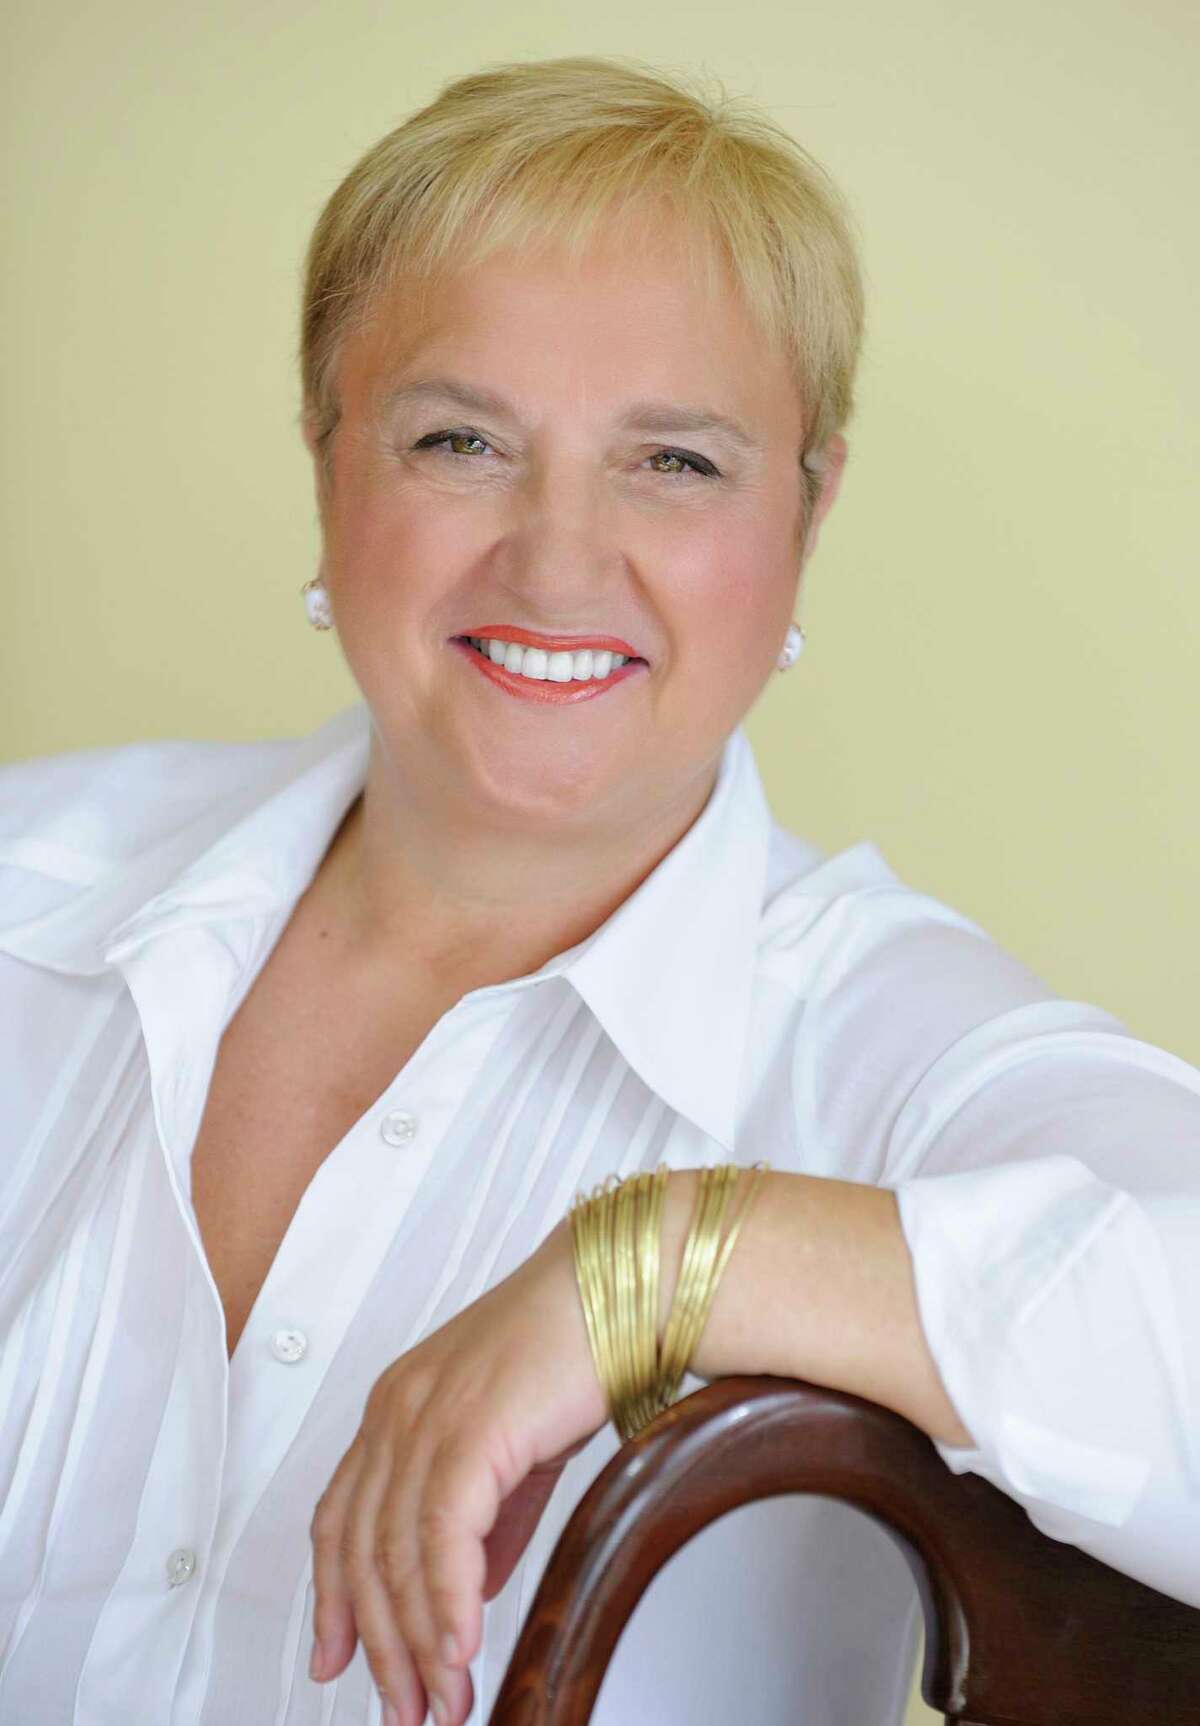 Renowned Italian chef and best-selling cookbook author Lidia Bastianich is the celebrity chef for the 2017 Wine & Food Week in the Woodlands June 5-11